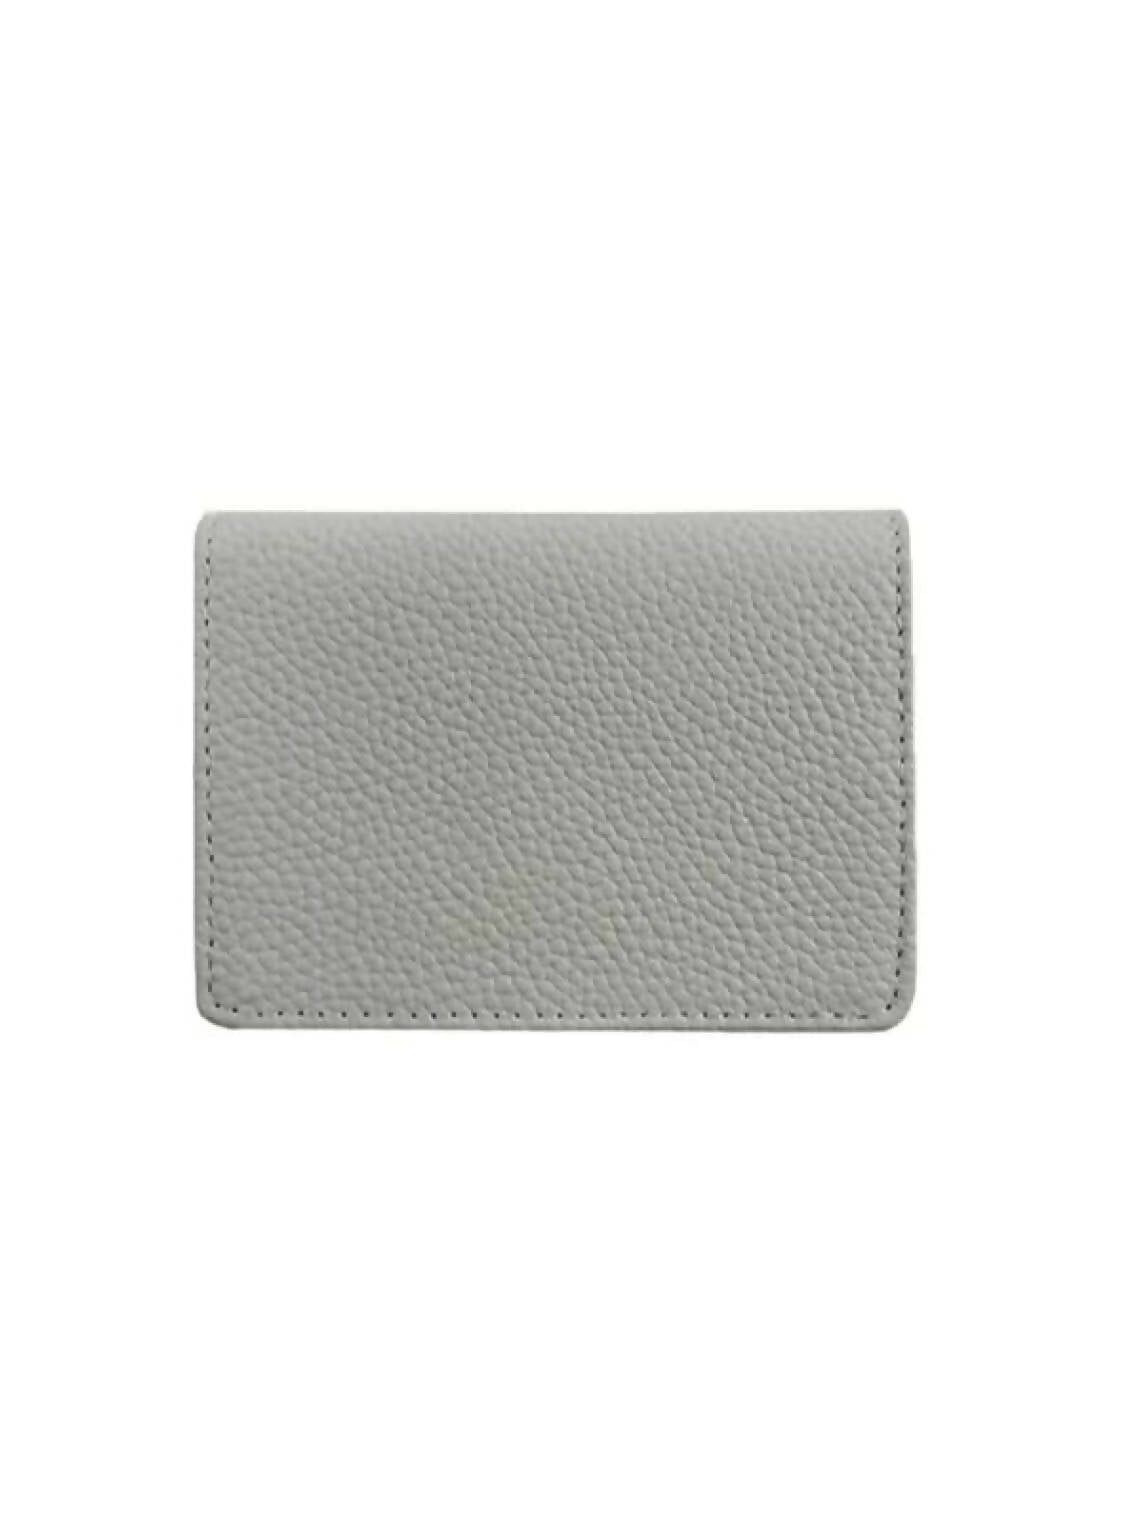 Customizable 5 Cards Wallet - Gray